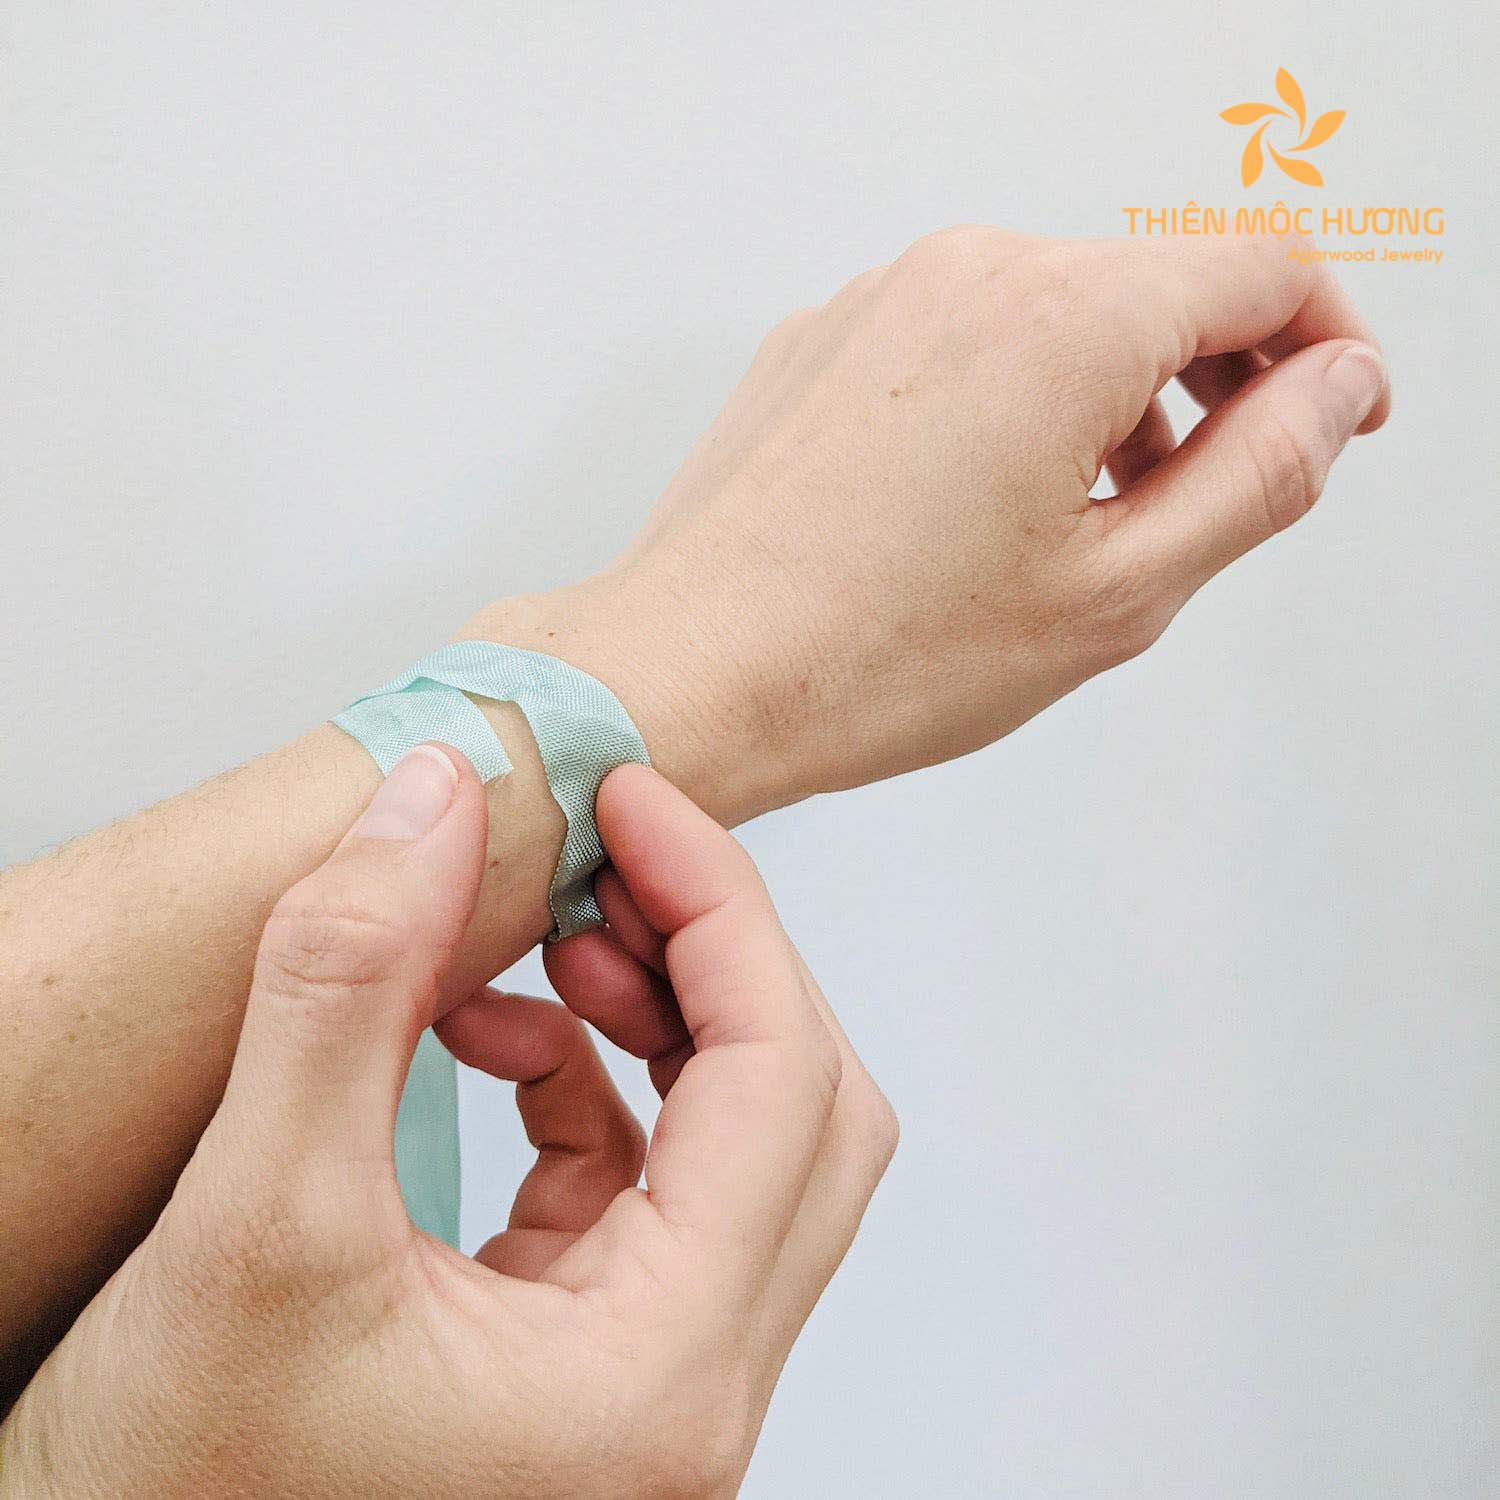 String or strip of paper: This makeshift tool allows you to measure your wrist